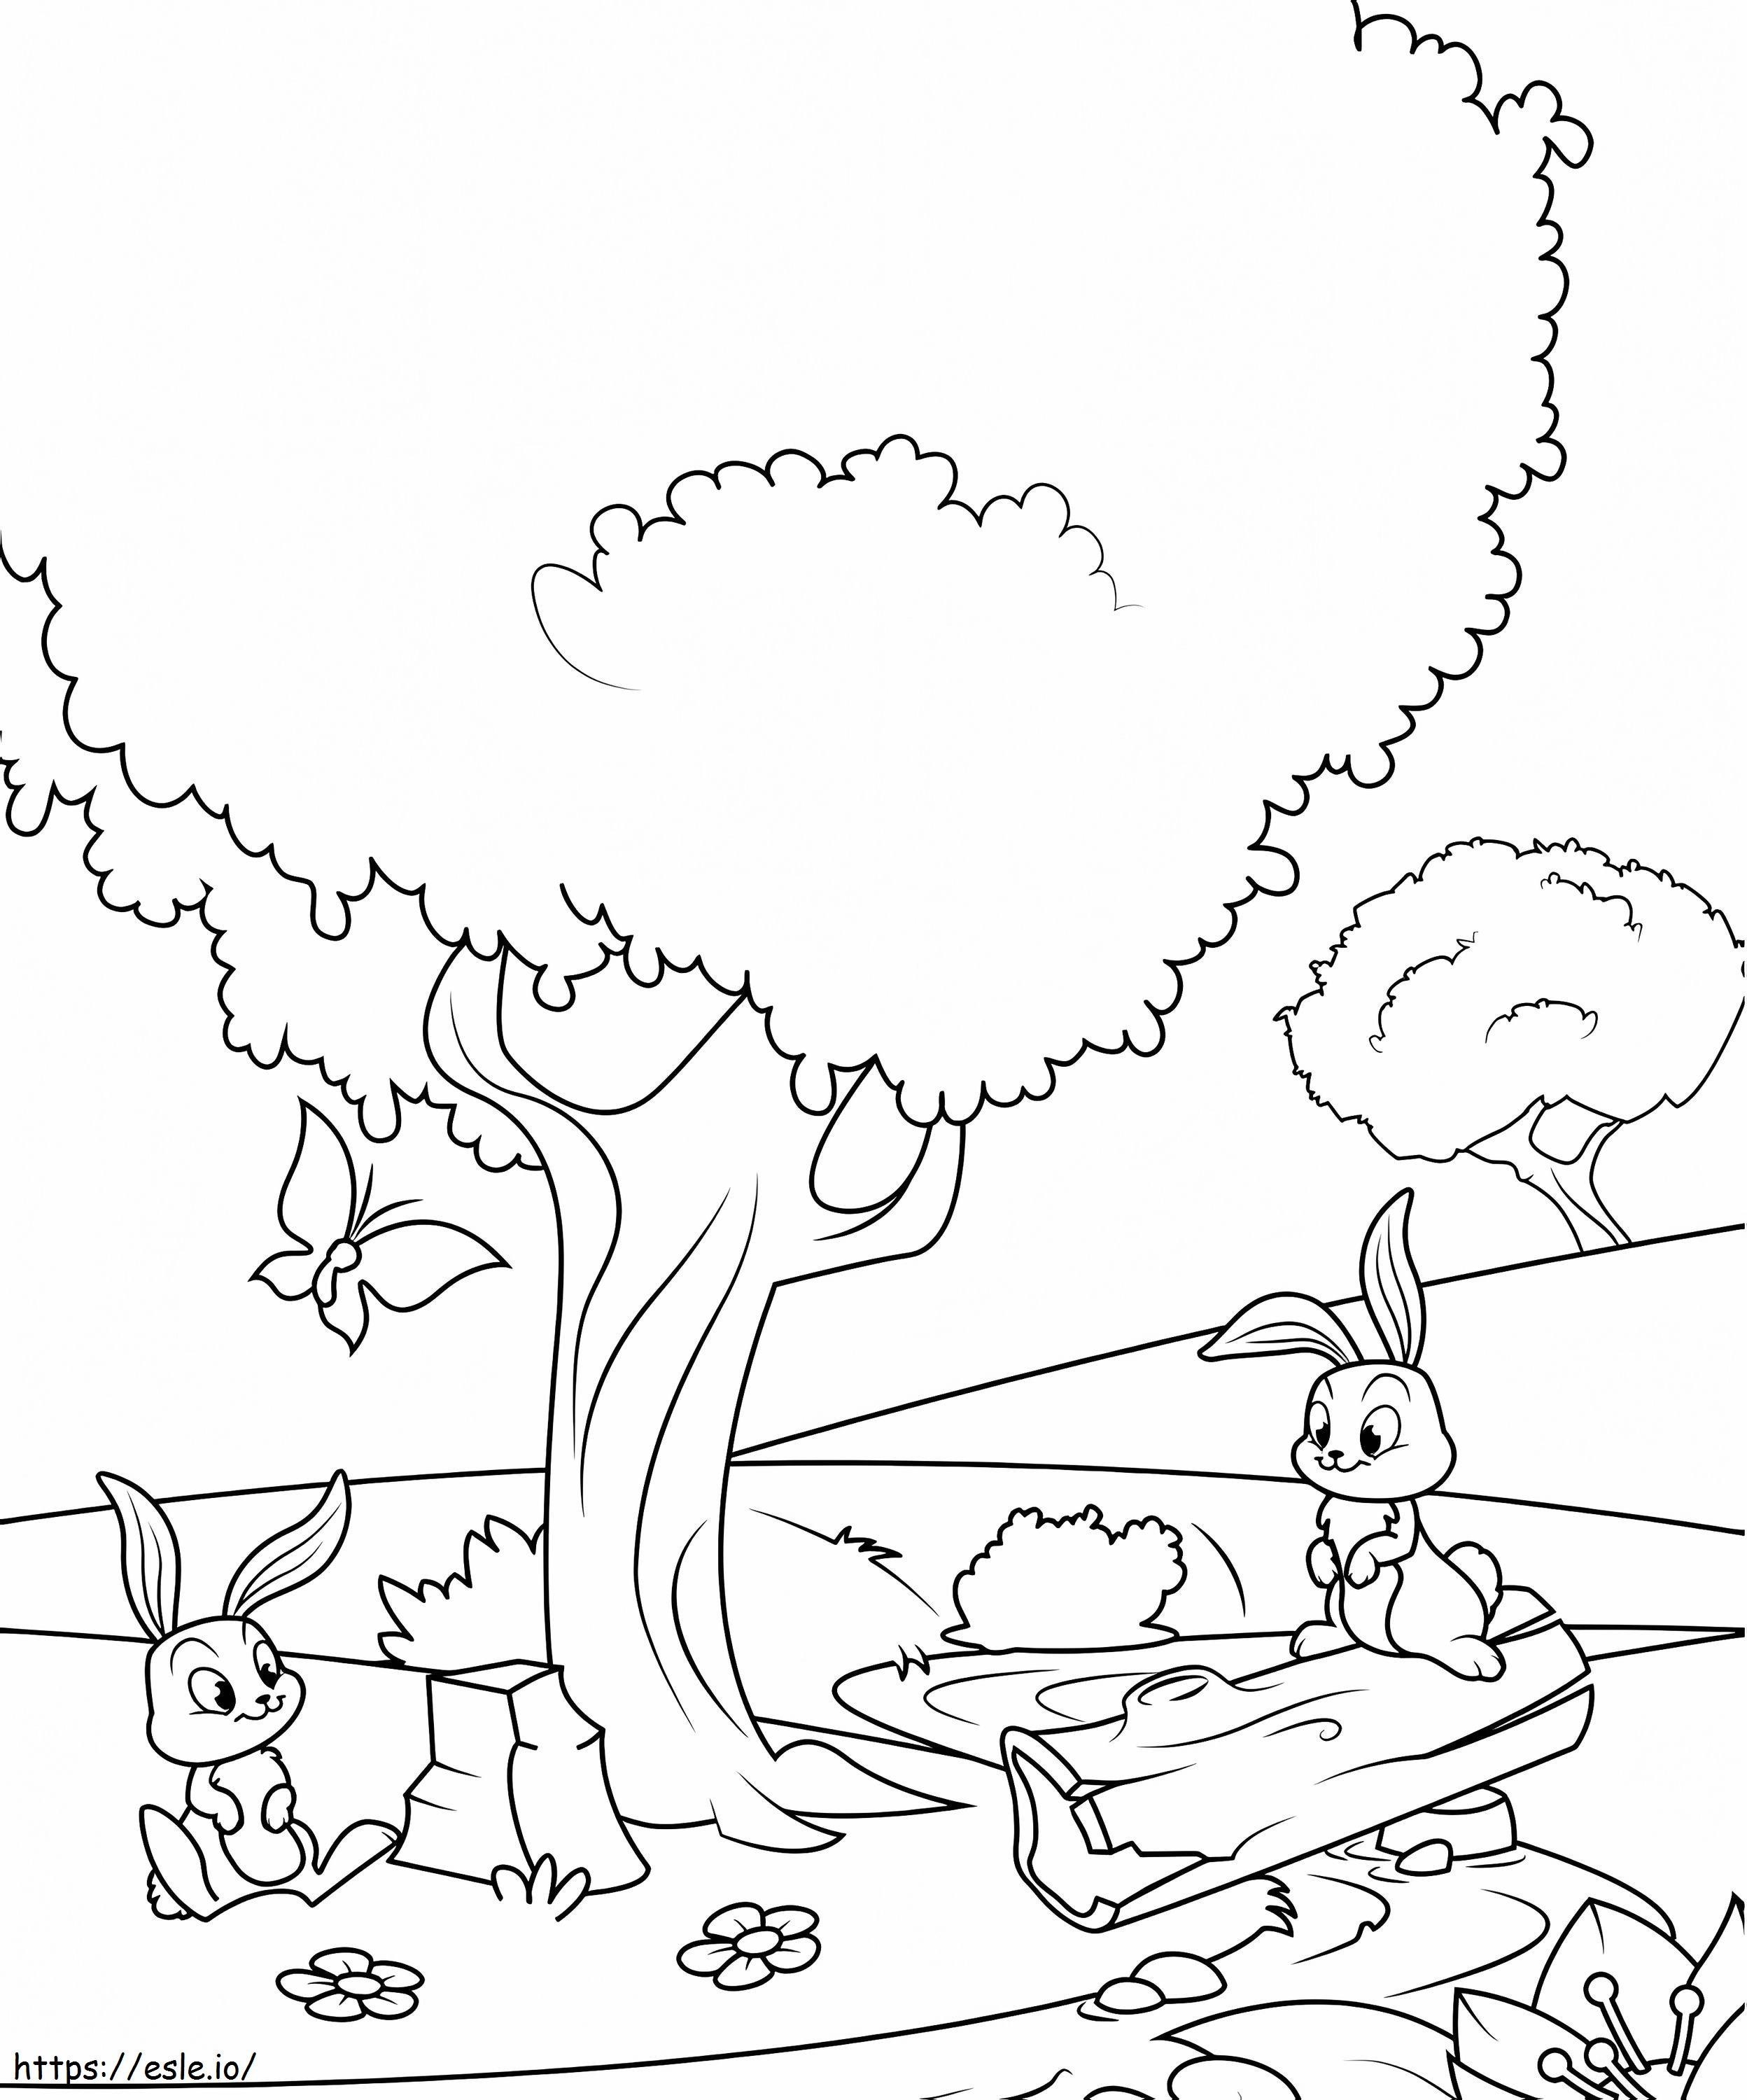 1560411721 Rabbits Under The Tree A4 coloring page